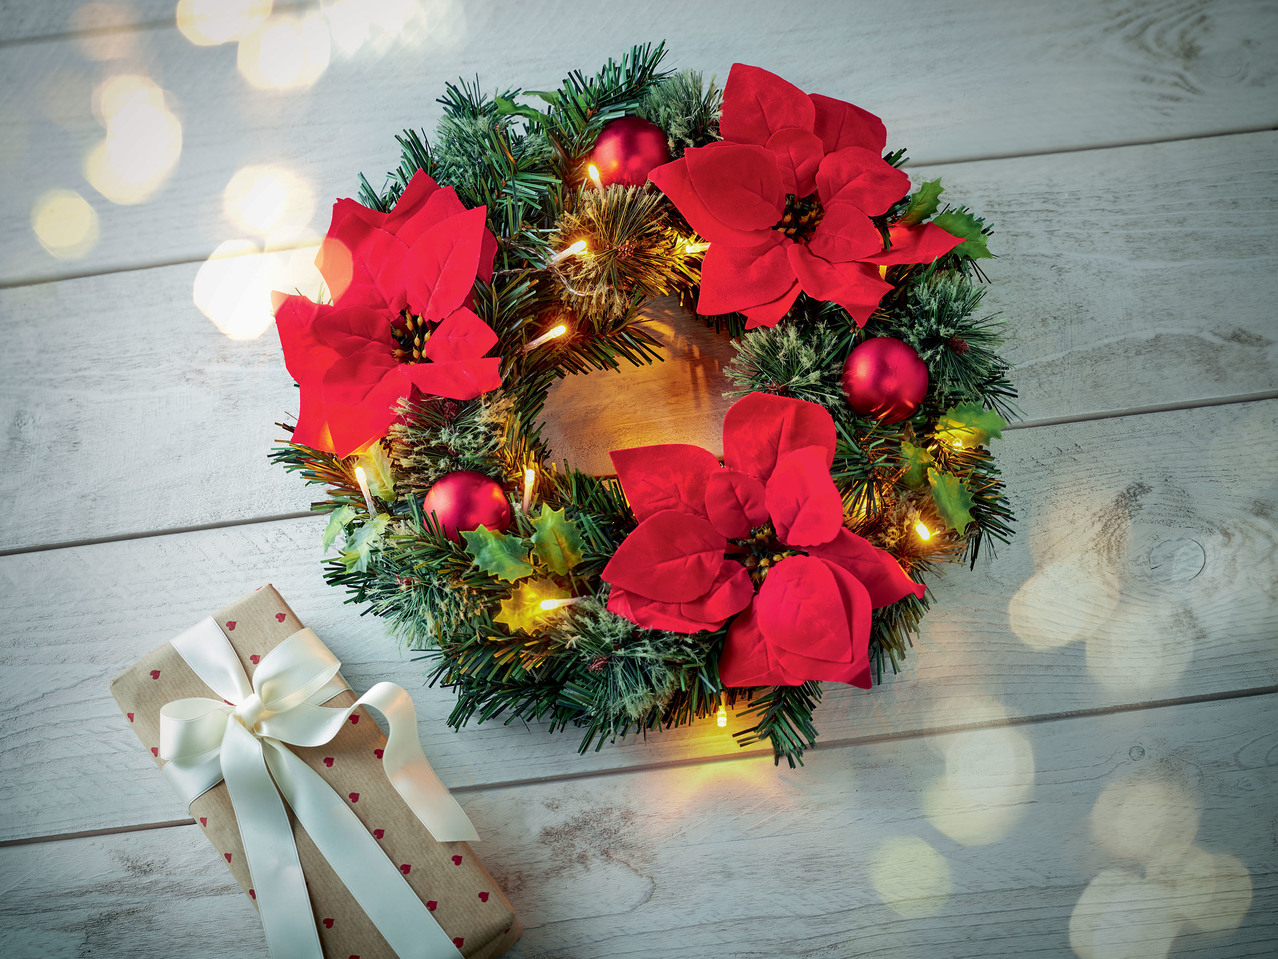 MELINERA LED Christmas Wreath Lidl — Ireland Specials archive